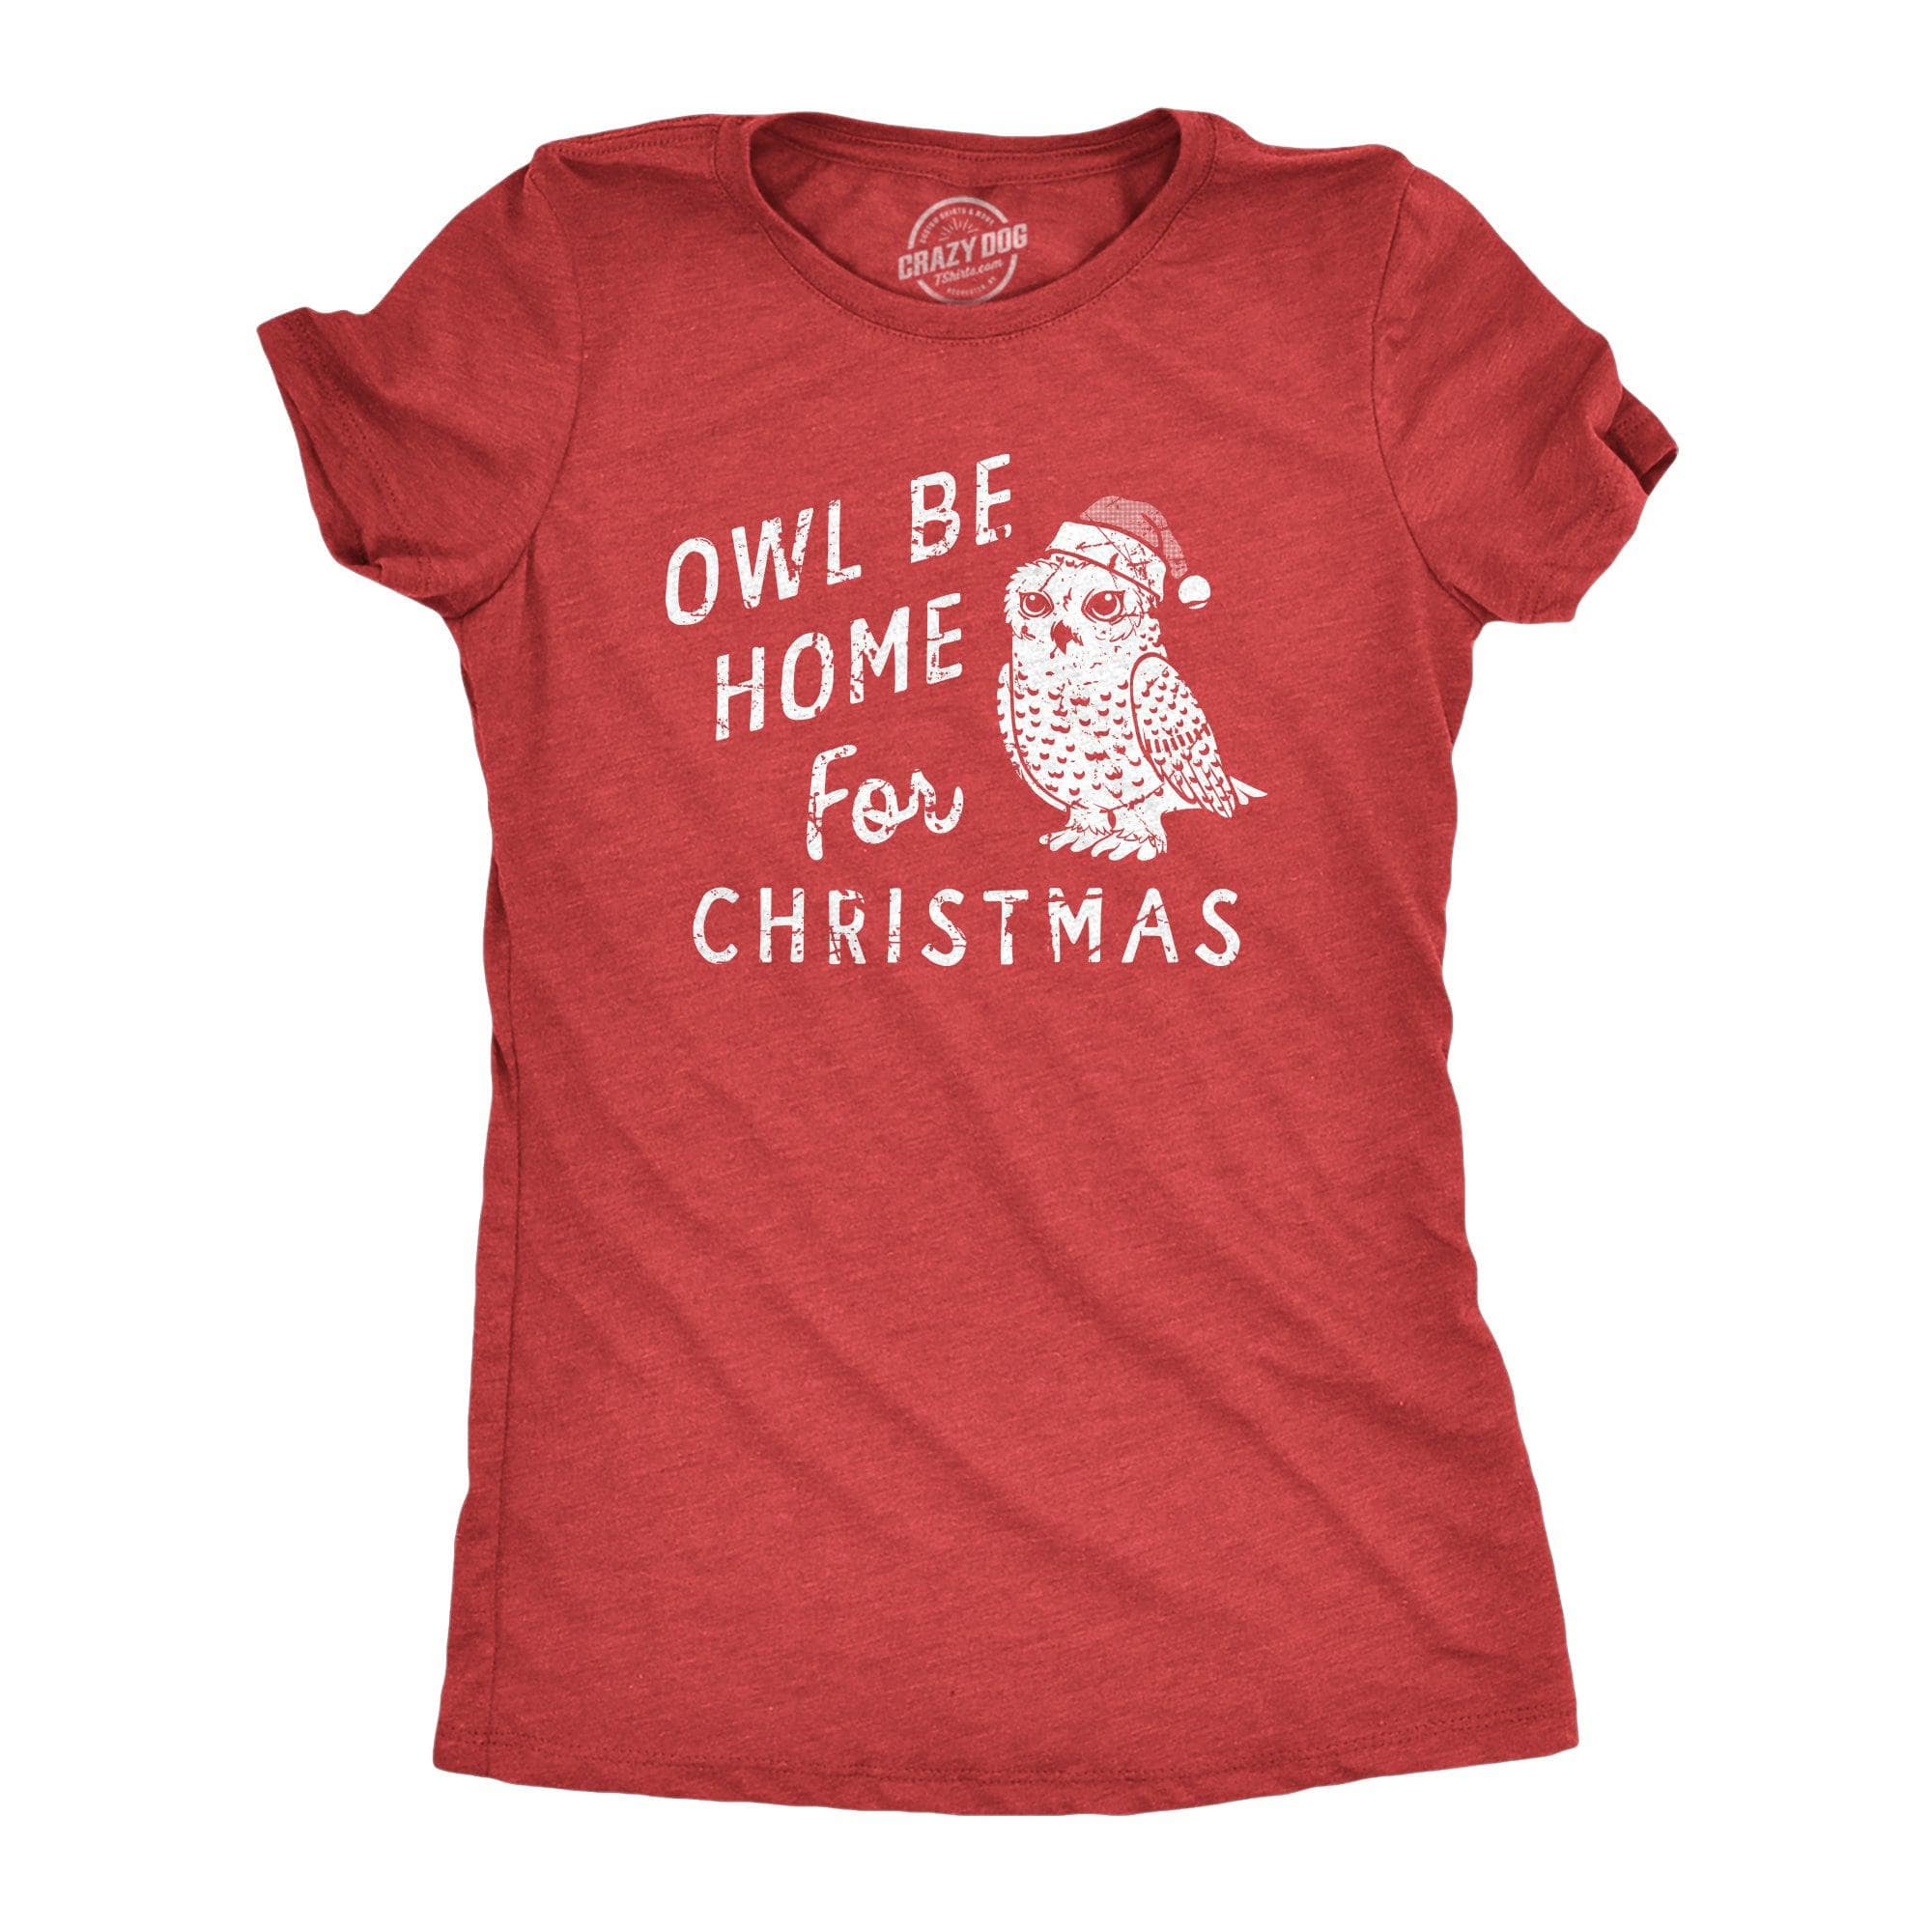 Owl Be Home For Christmas Women's Tshirt  -  Crazy Dog T-Shirts